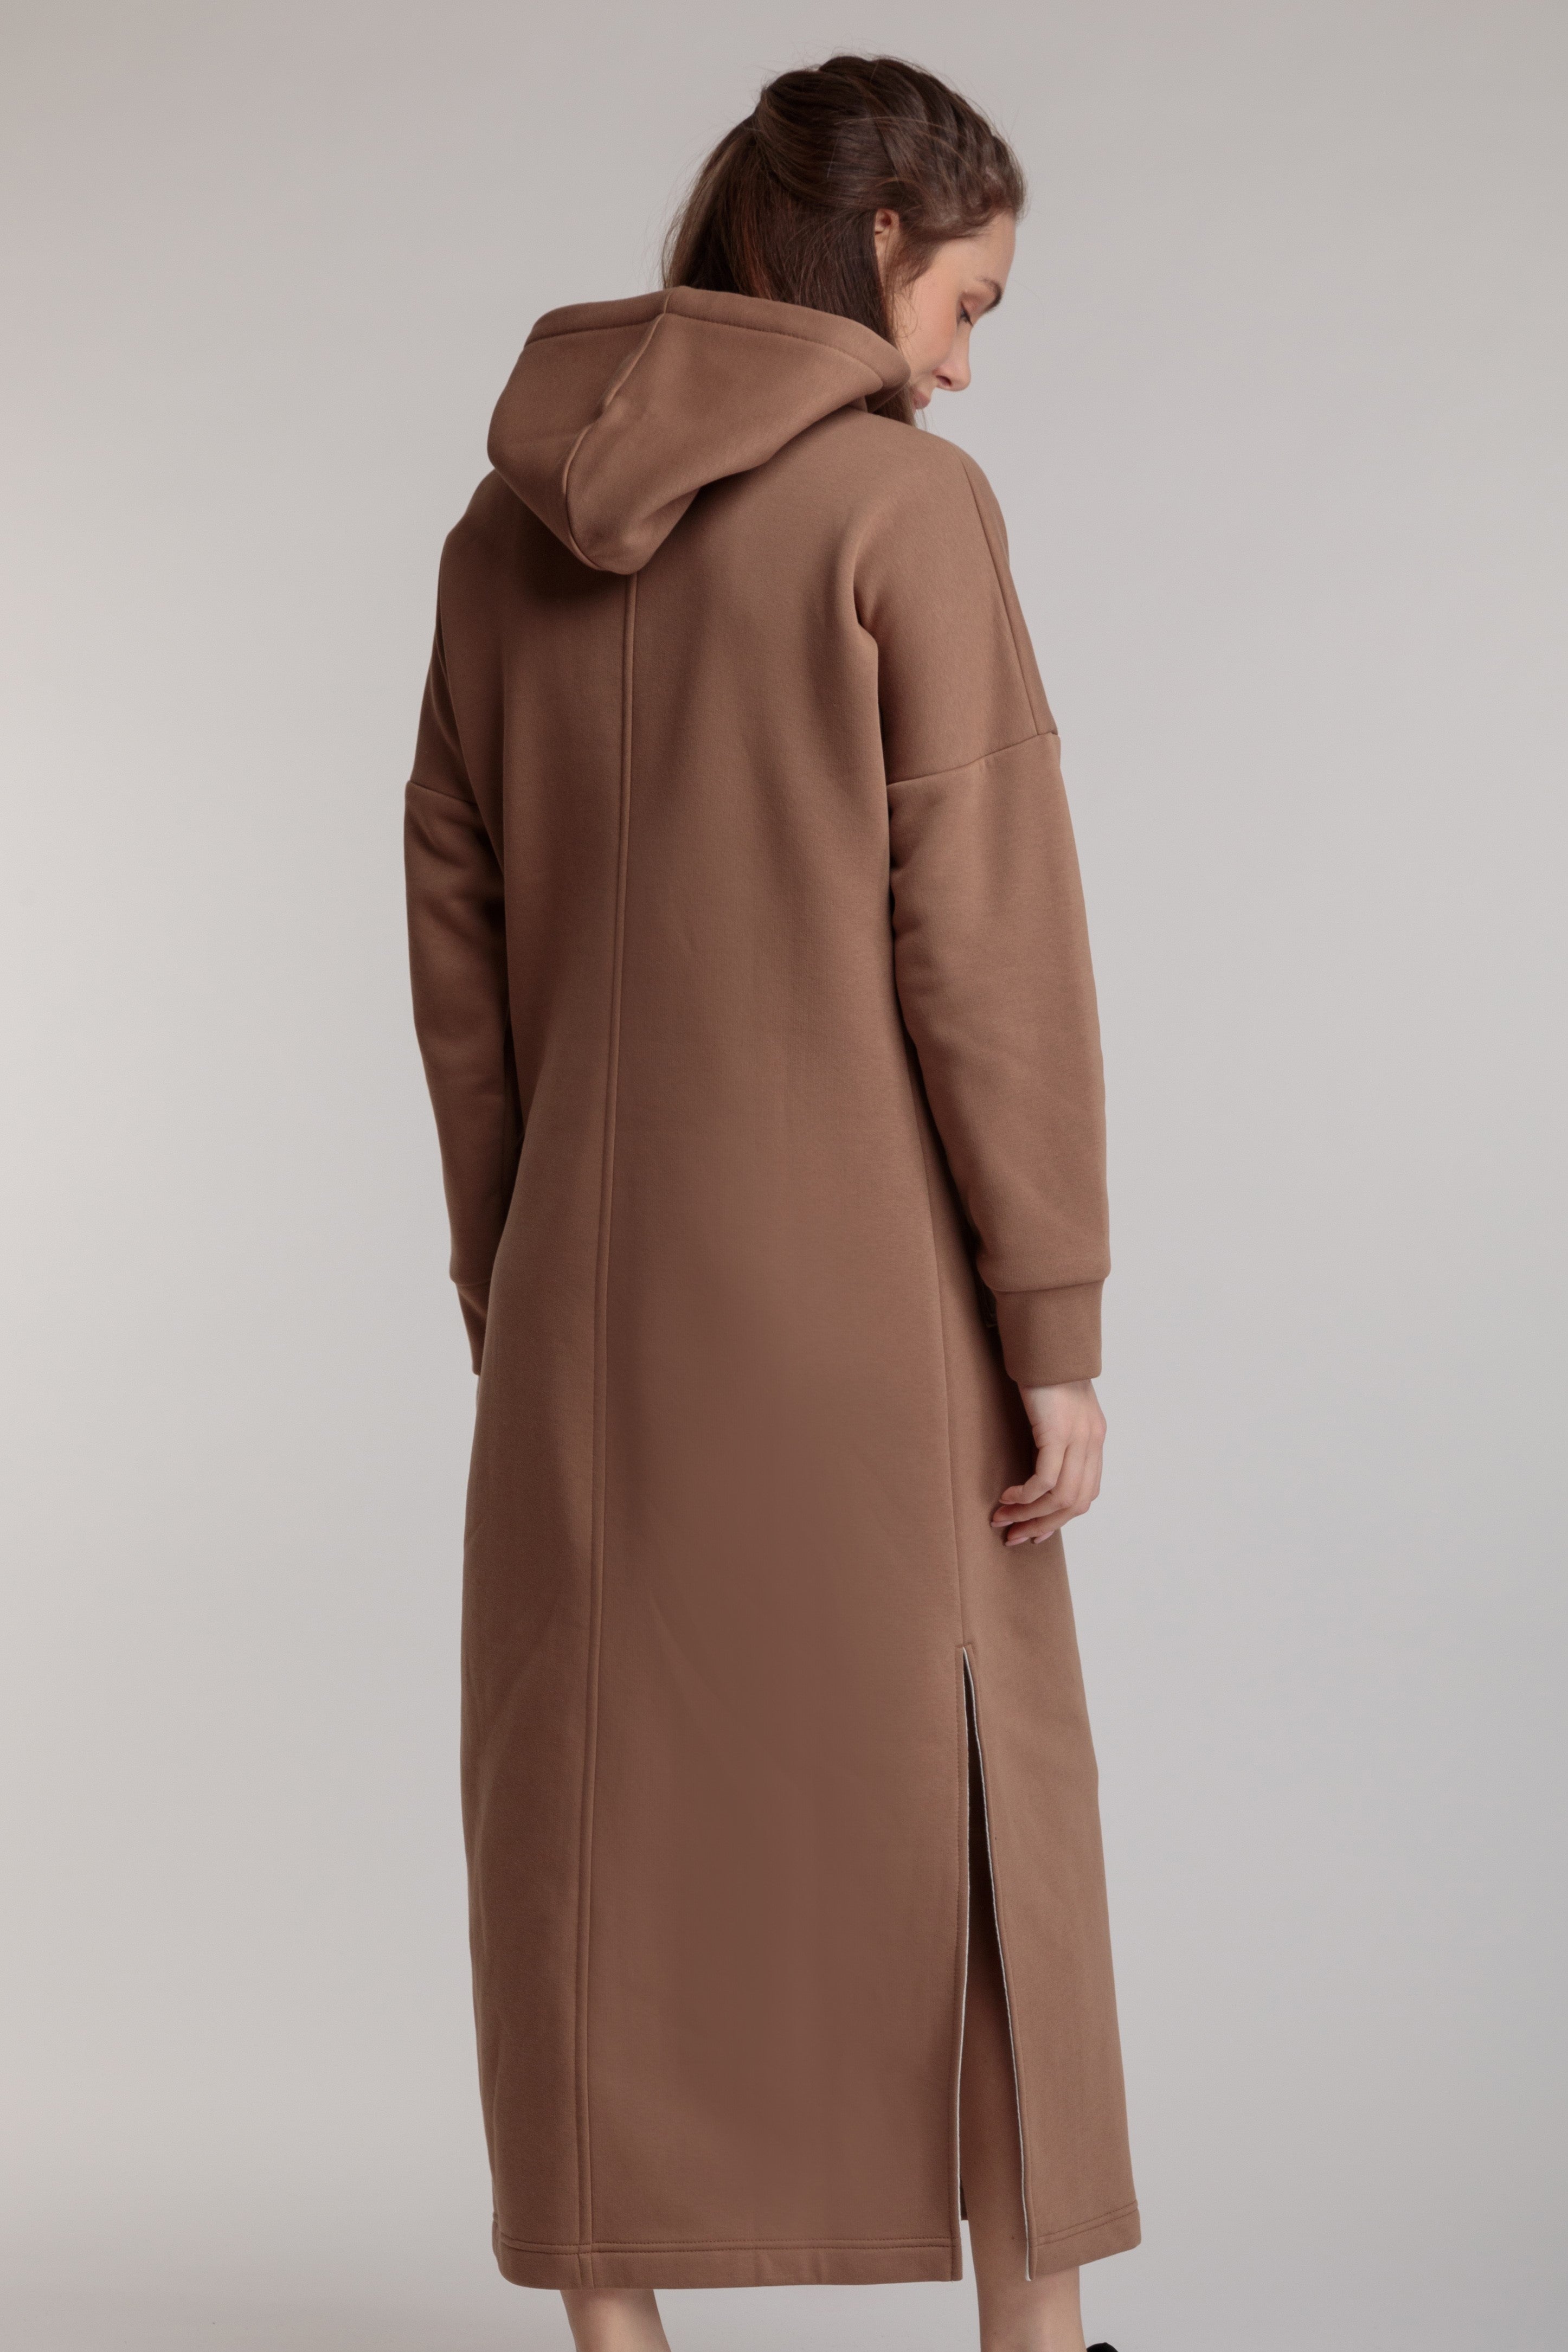 Long straight warm dress in beige color with slits, hood and pocket